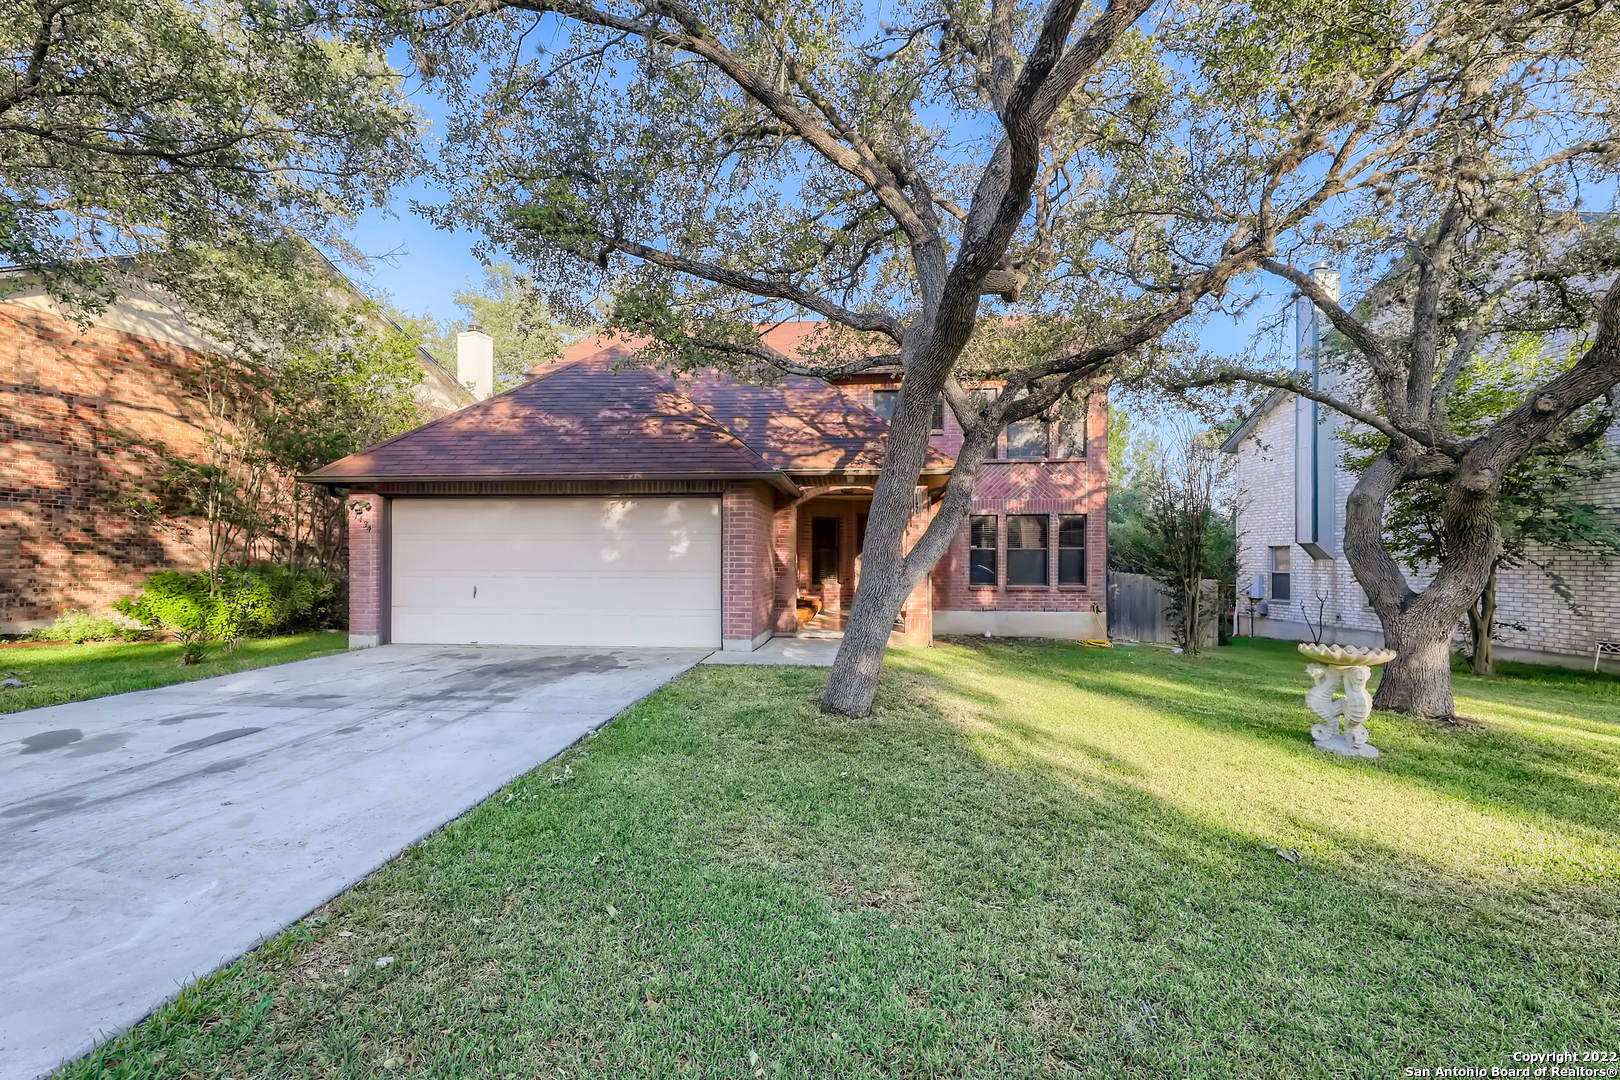 *Click the Virtual Tour link to view the 3D Tour. Welcome to 17434 Emerald Canyon Dr.  Mature trees and an inviting entrance lead to an open floor plan, designed for comfortable living and function. Enjoy the spaciousness provided by a separate dining room and bonus room, easily used for whatever fits your needs. The kitchen is fully upgraded, with granite counters, stainless steel appliances, and a large island. All bedrooms are located upstairs. The generous primary bedroom features a  walk-in closet and an ensuite, equipped with a soaking tub and double vanity. A large deck and fenced in backyard are perfect for outdoor dining and entertainment. This lovingly maintained residence is just minutes away from 1604, 281, Mud Creek Park, shopping, and dining.